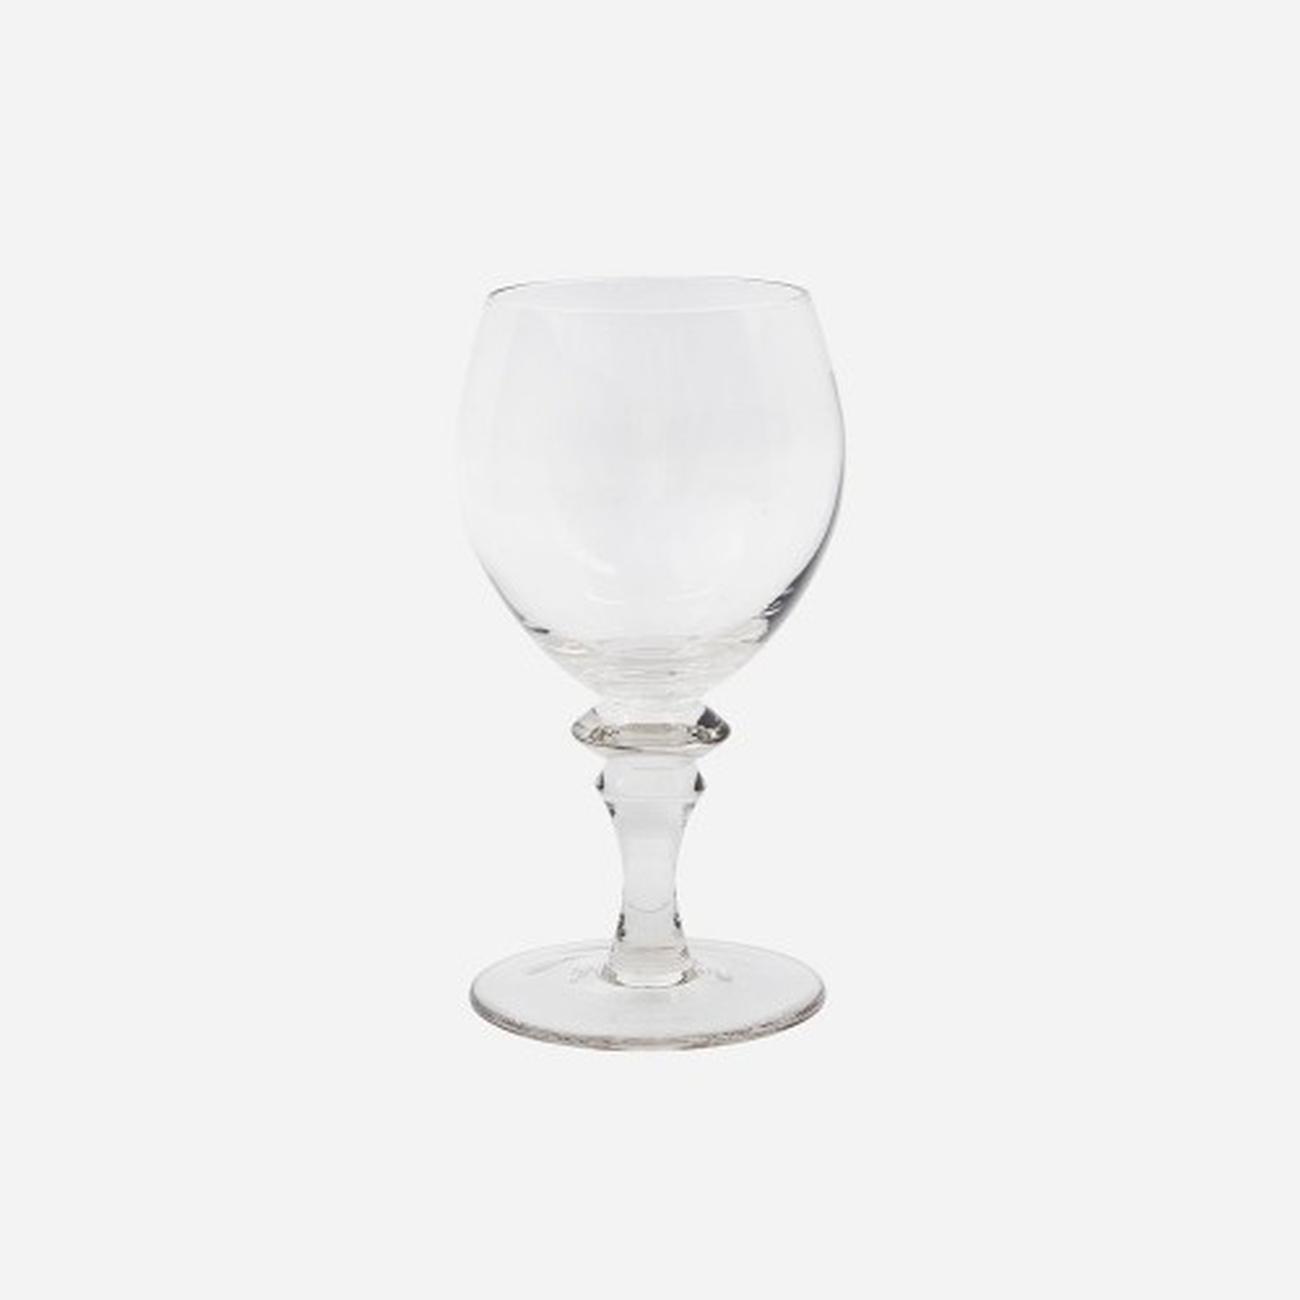 house-doctor-white-wine-glass-clear-main - House Doctor Main White Wine Glass